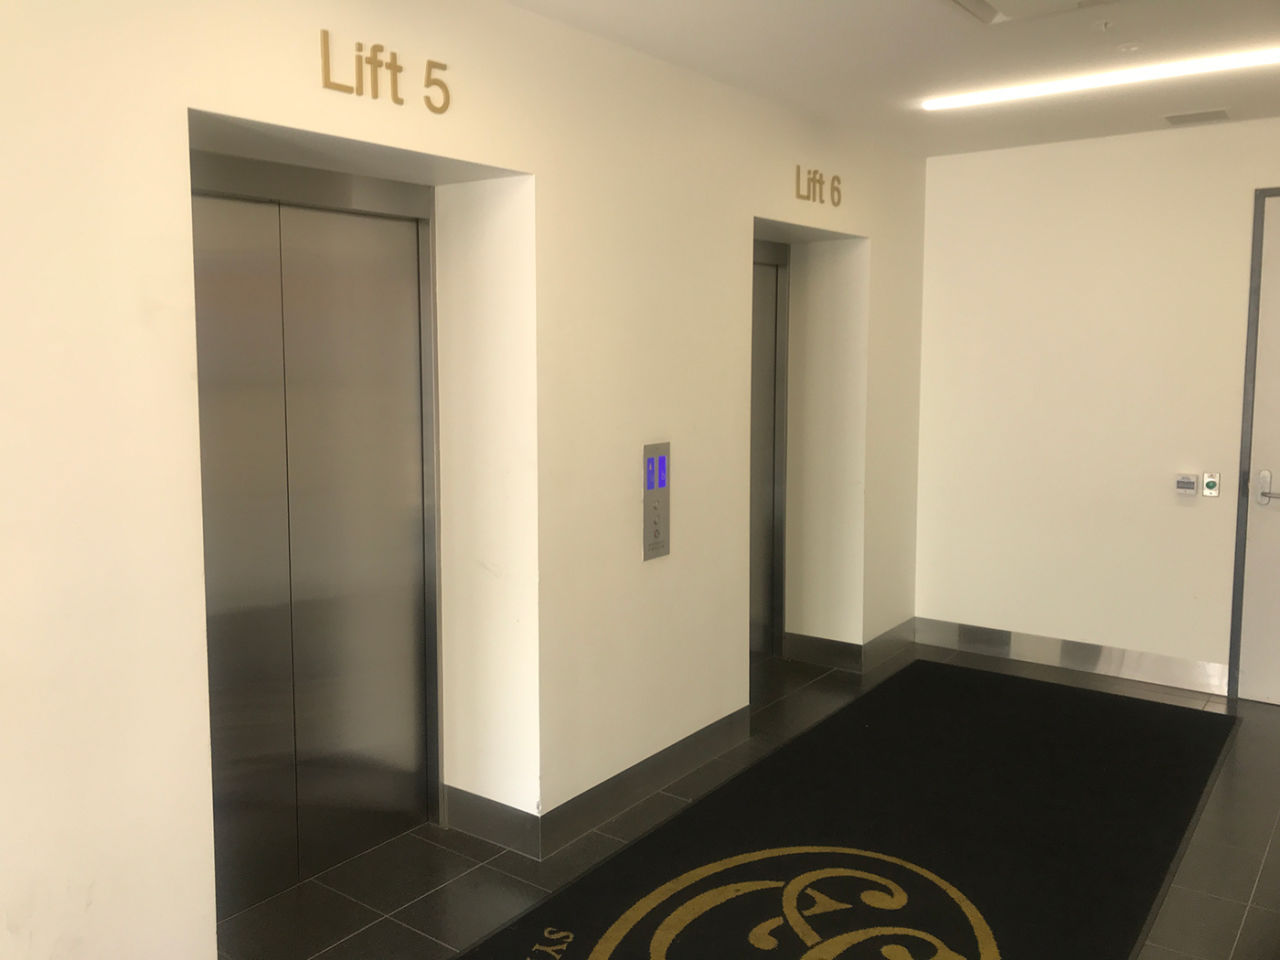 Lifts in the Sydney Cricket Ground, January 2019